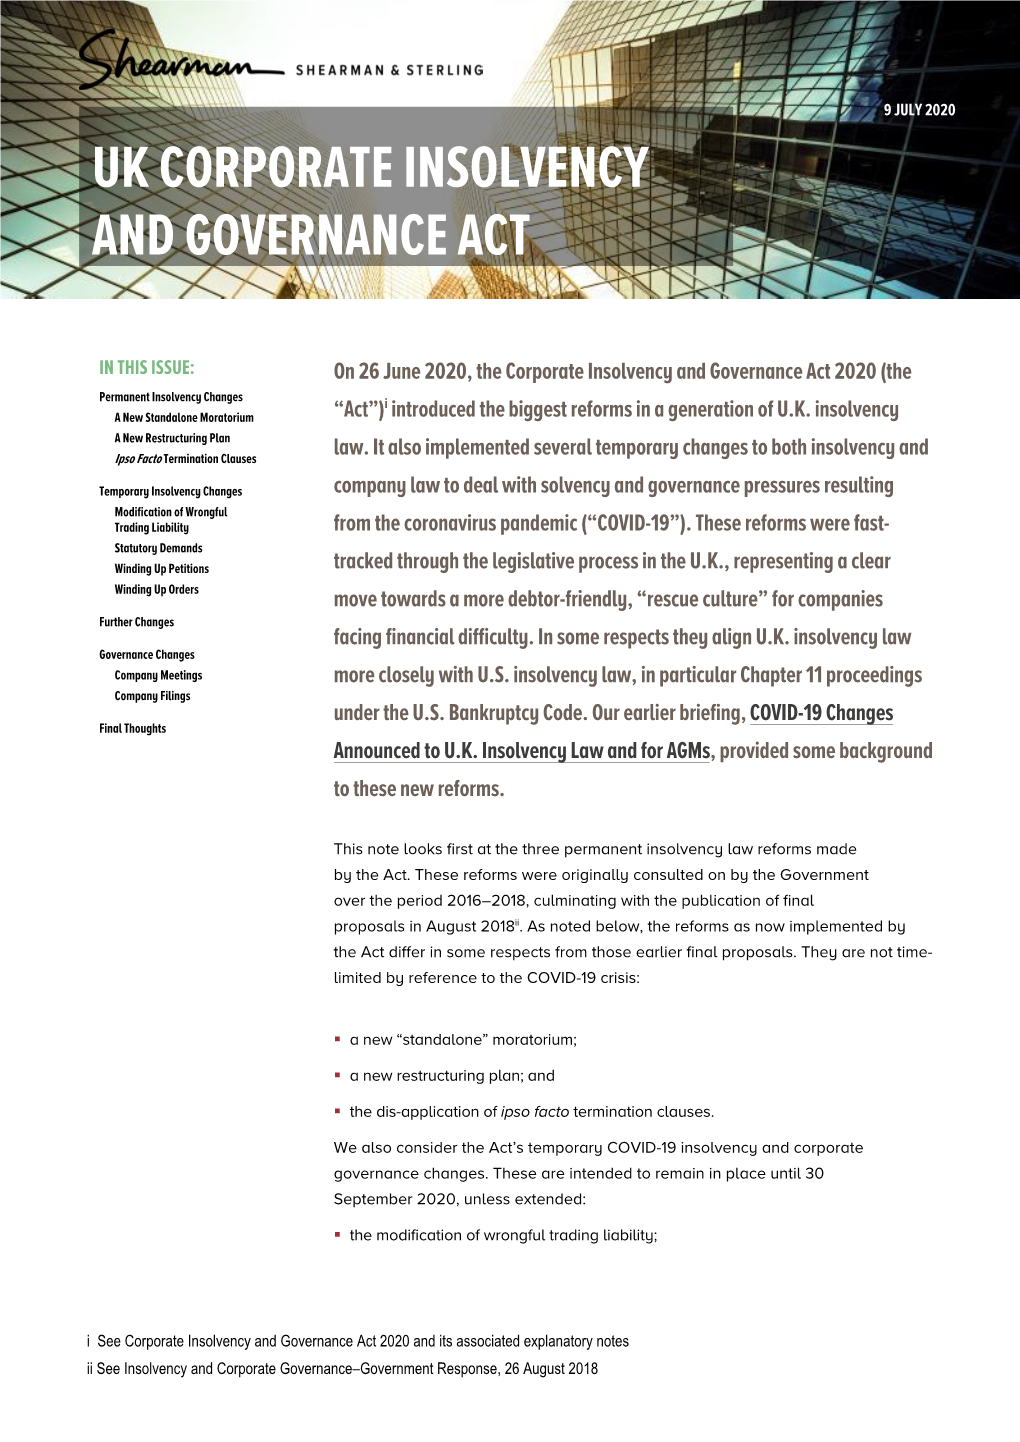 UK Corporate Insolvency and Governance Act 2020